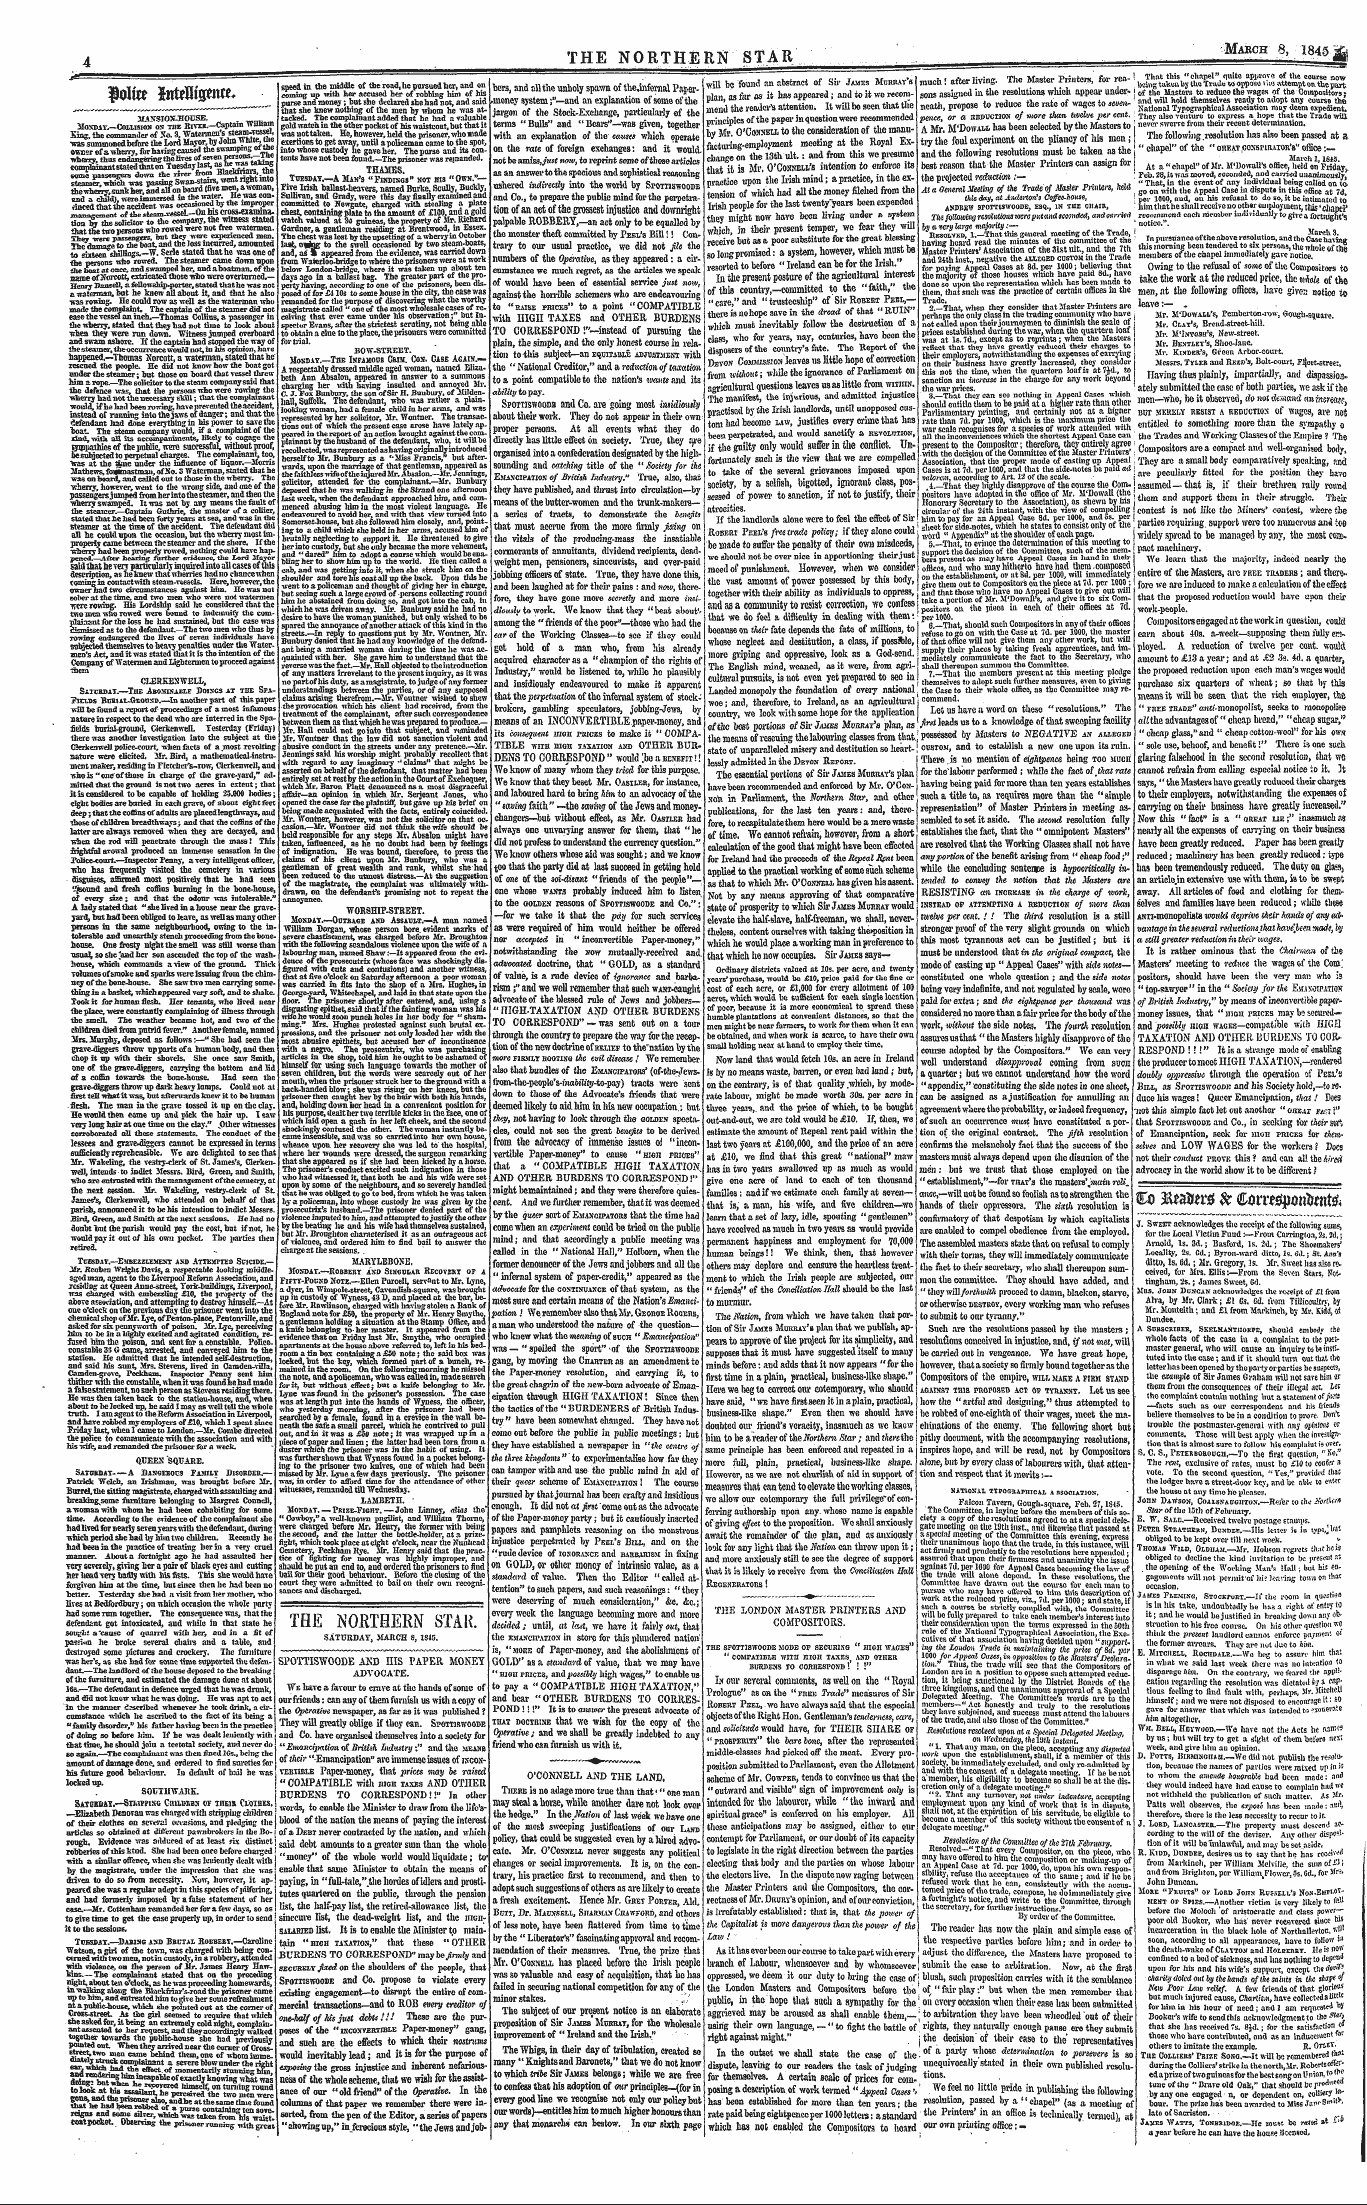 Northern Star (1837-1852): jS F Y, 2nd edition - The Northern Star Saturday, March 8, 1s15.